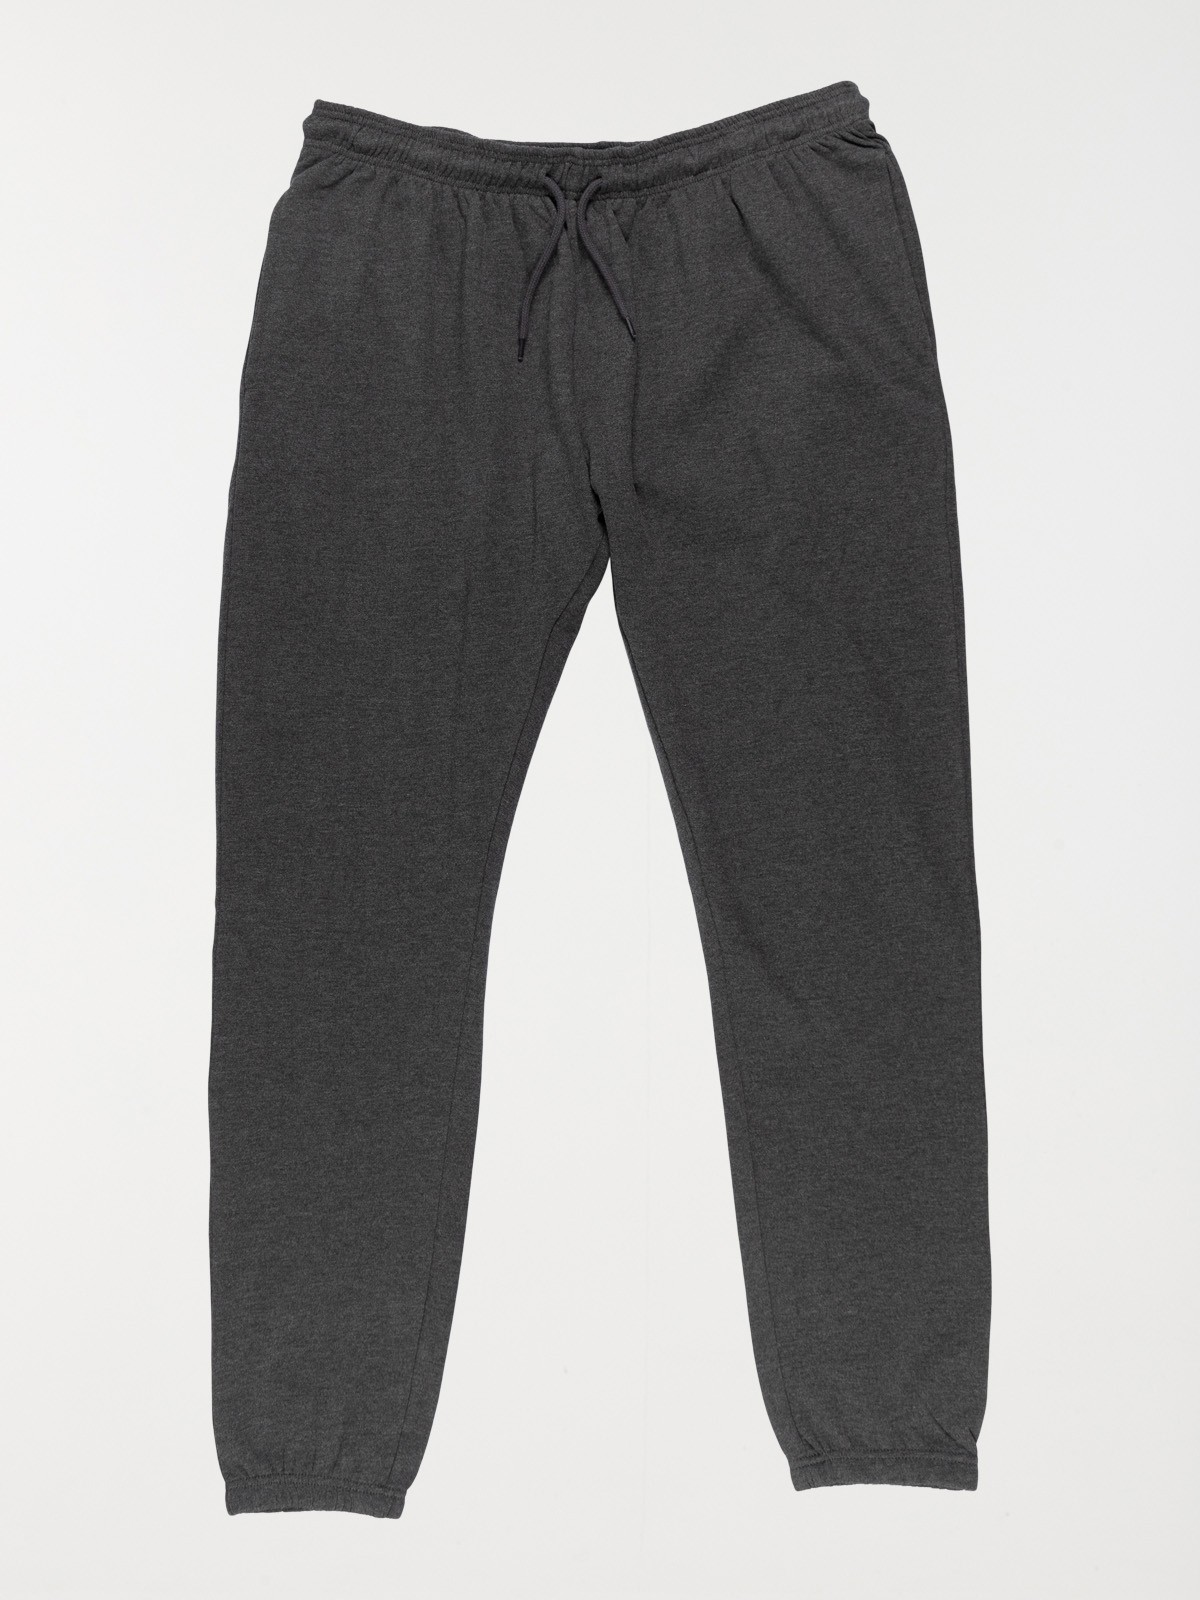 jogger pants homme grande taille